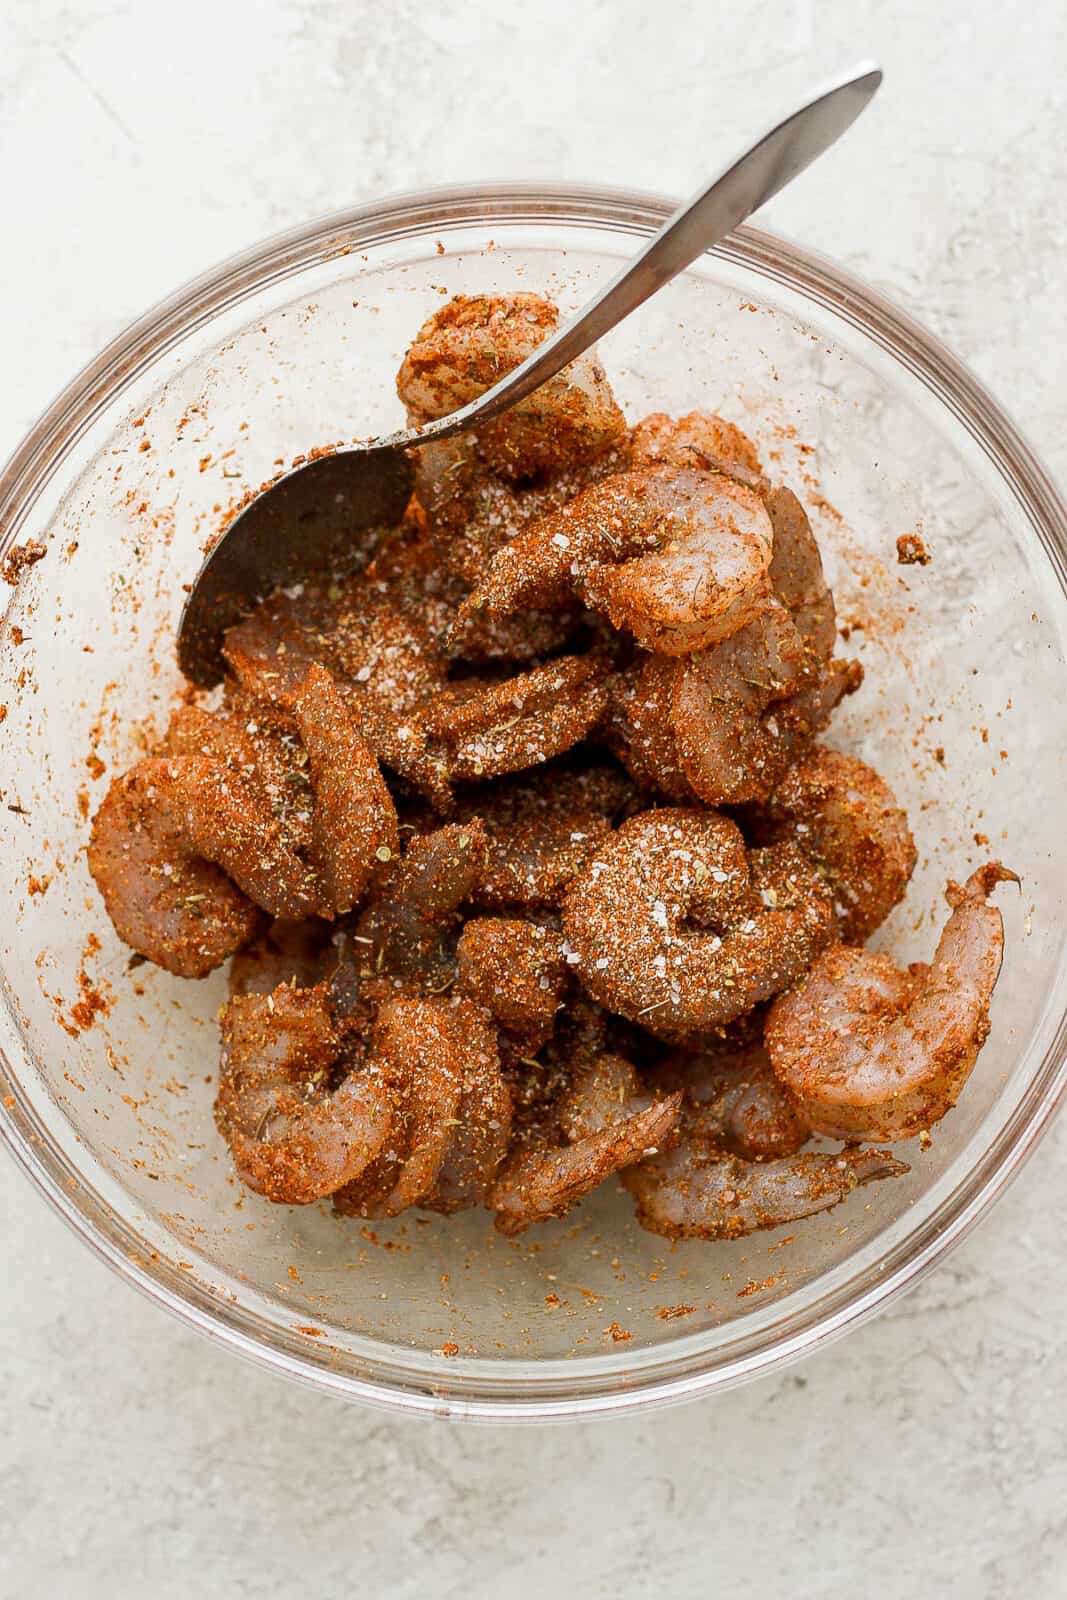 Shrimp being coated with blackened seasoning in a bowl with a spoon.